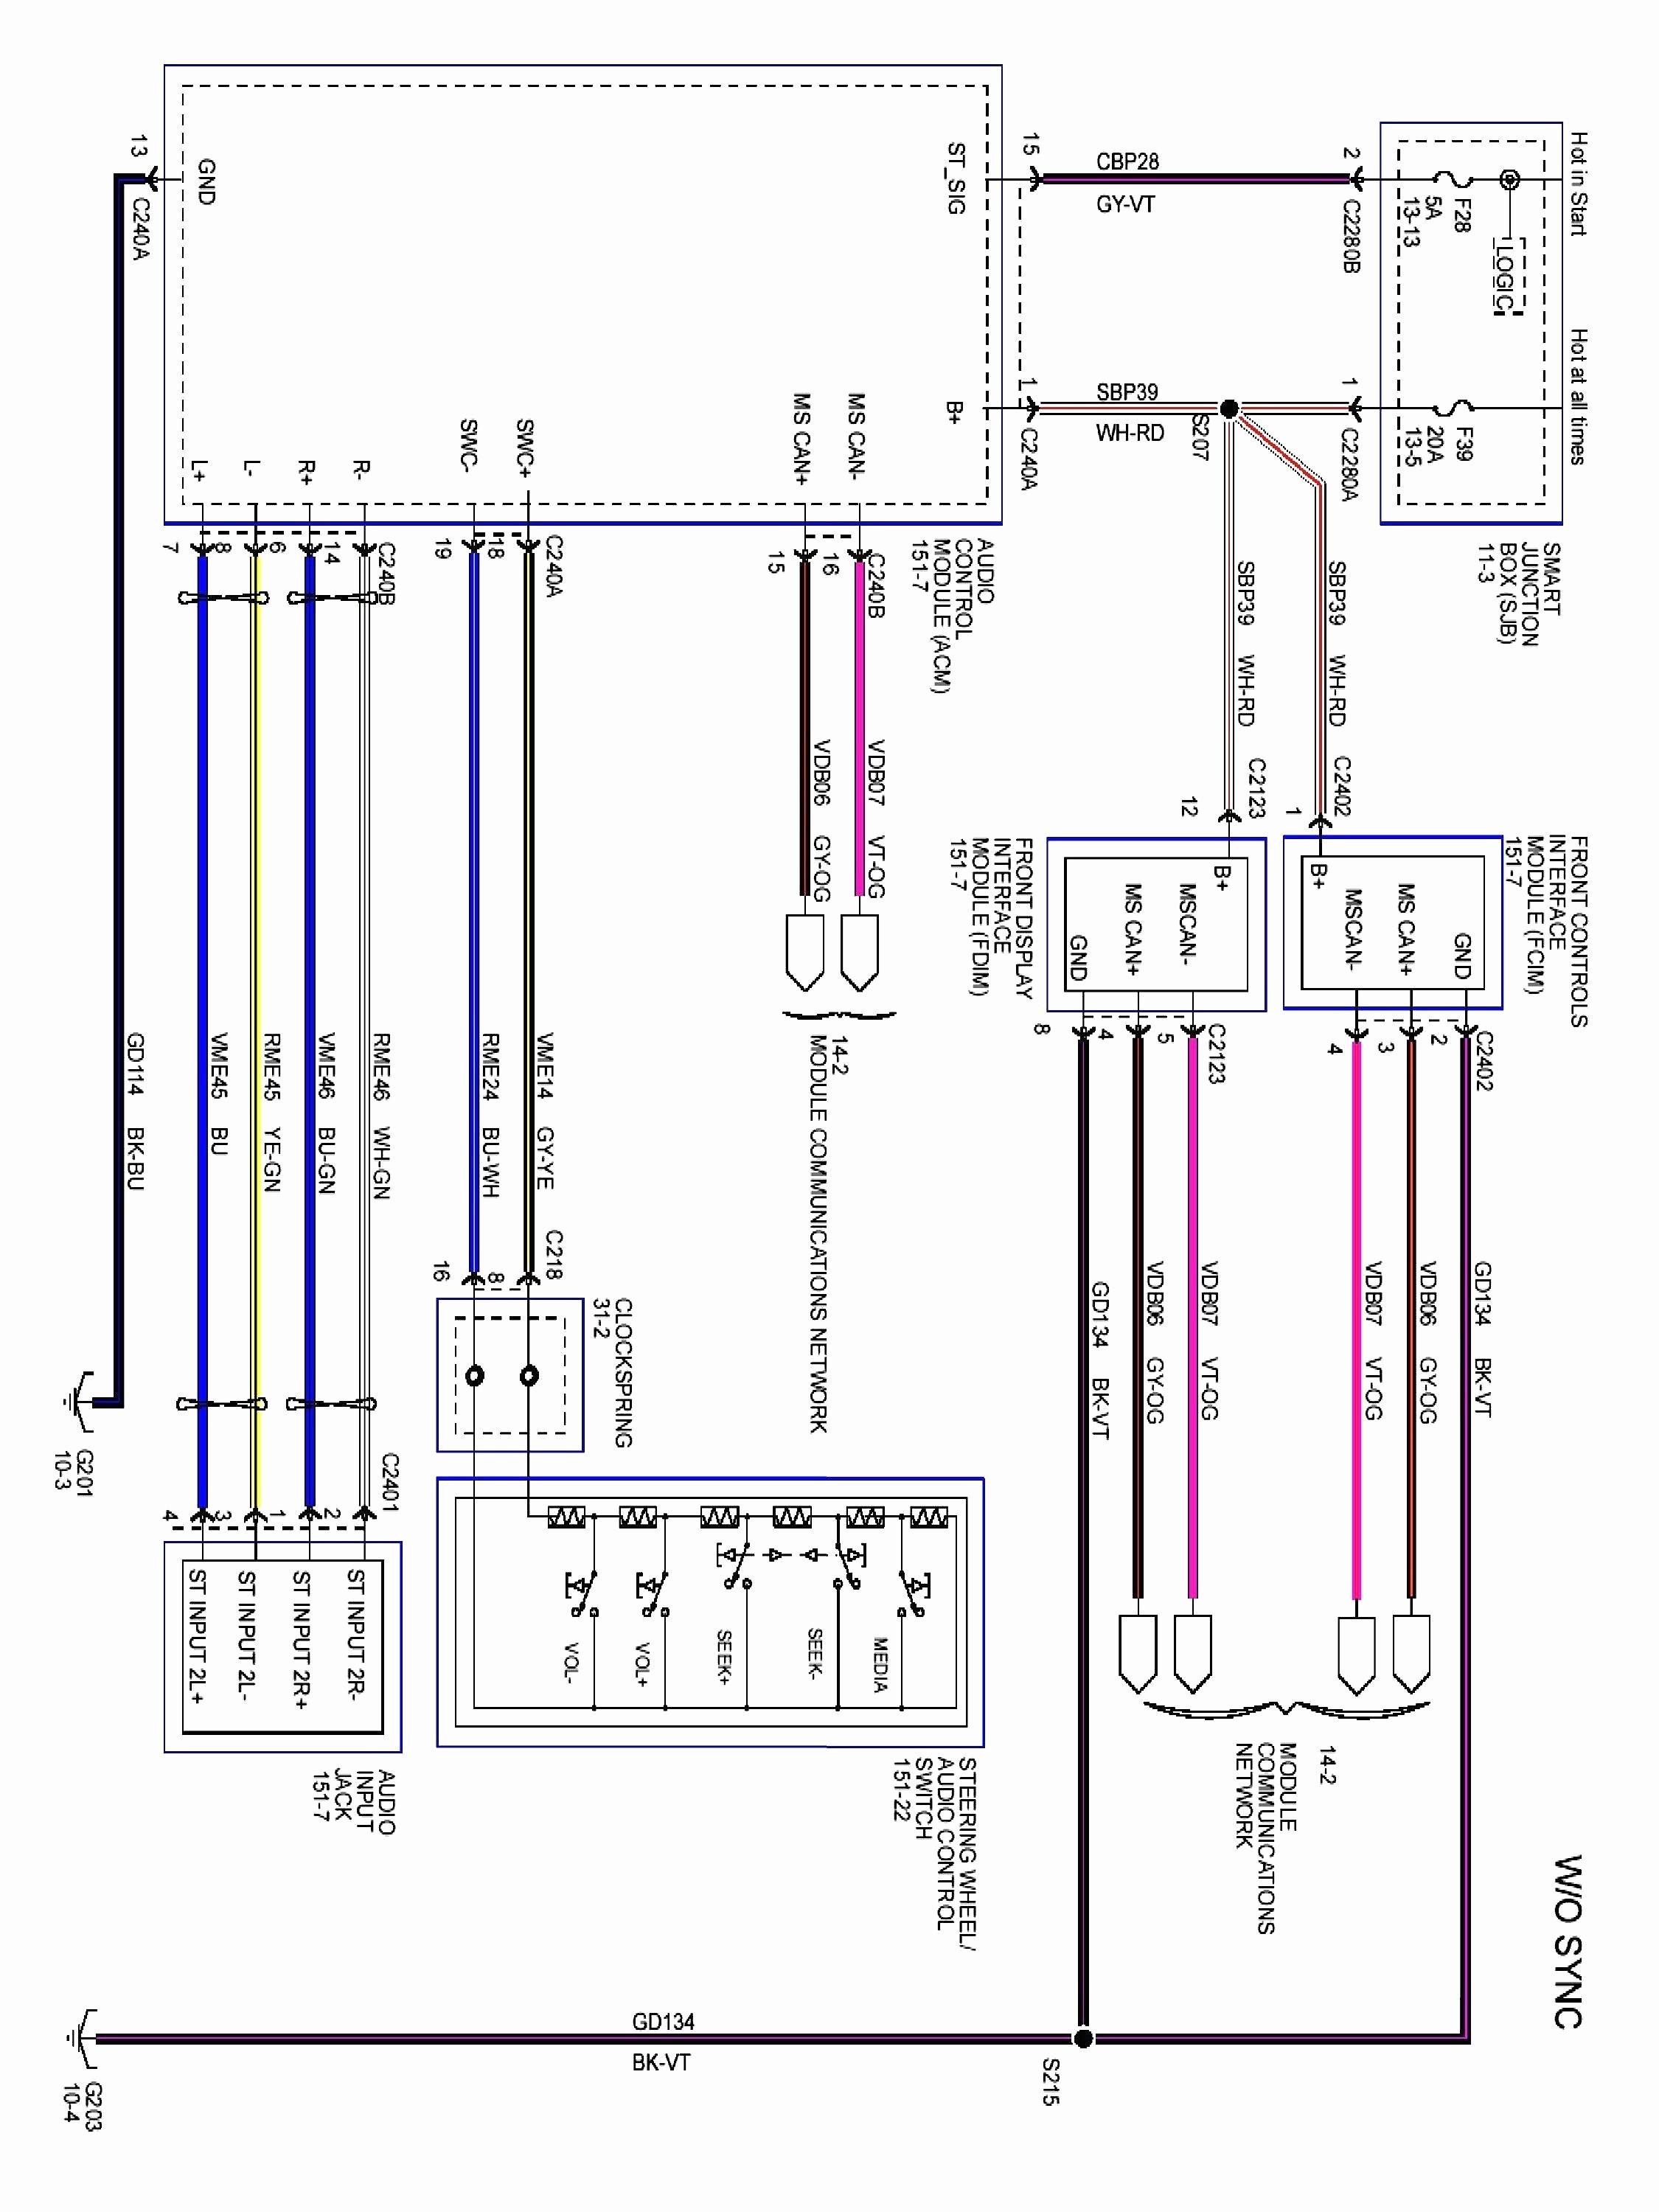 Wiring Diagram for Amplifier Car Stereo Best Amplifier Wiring Car Audio Wiring Diagram Gallery Car